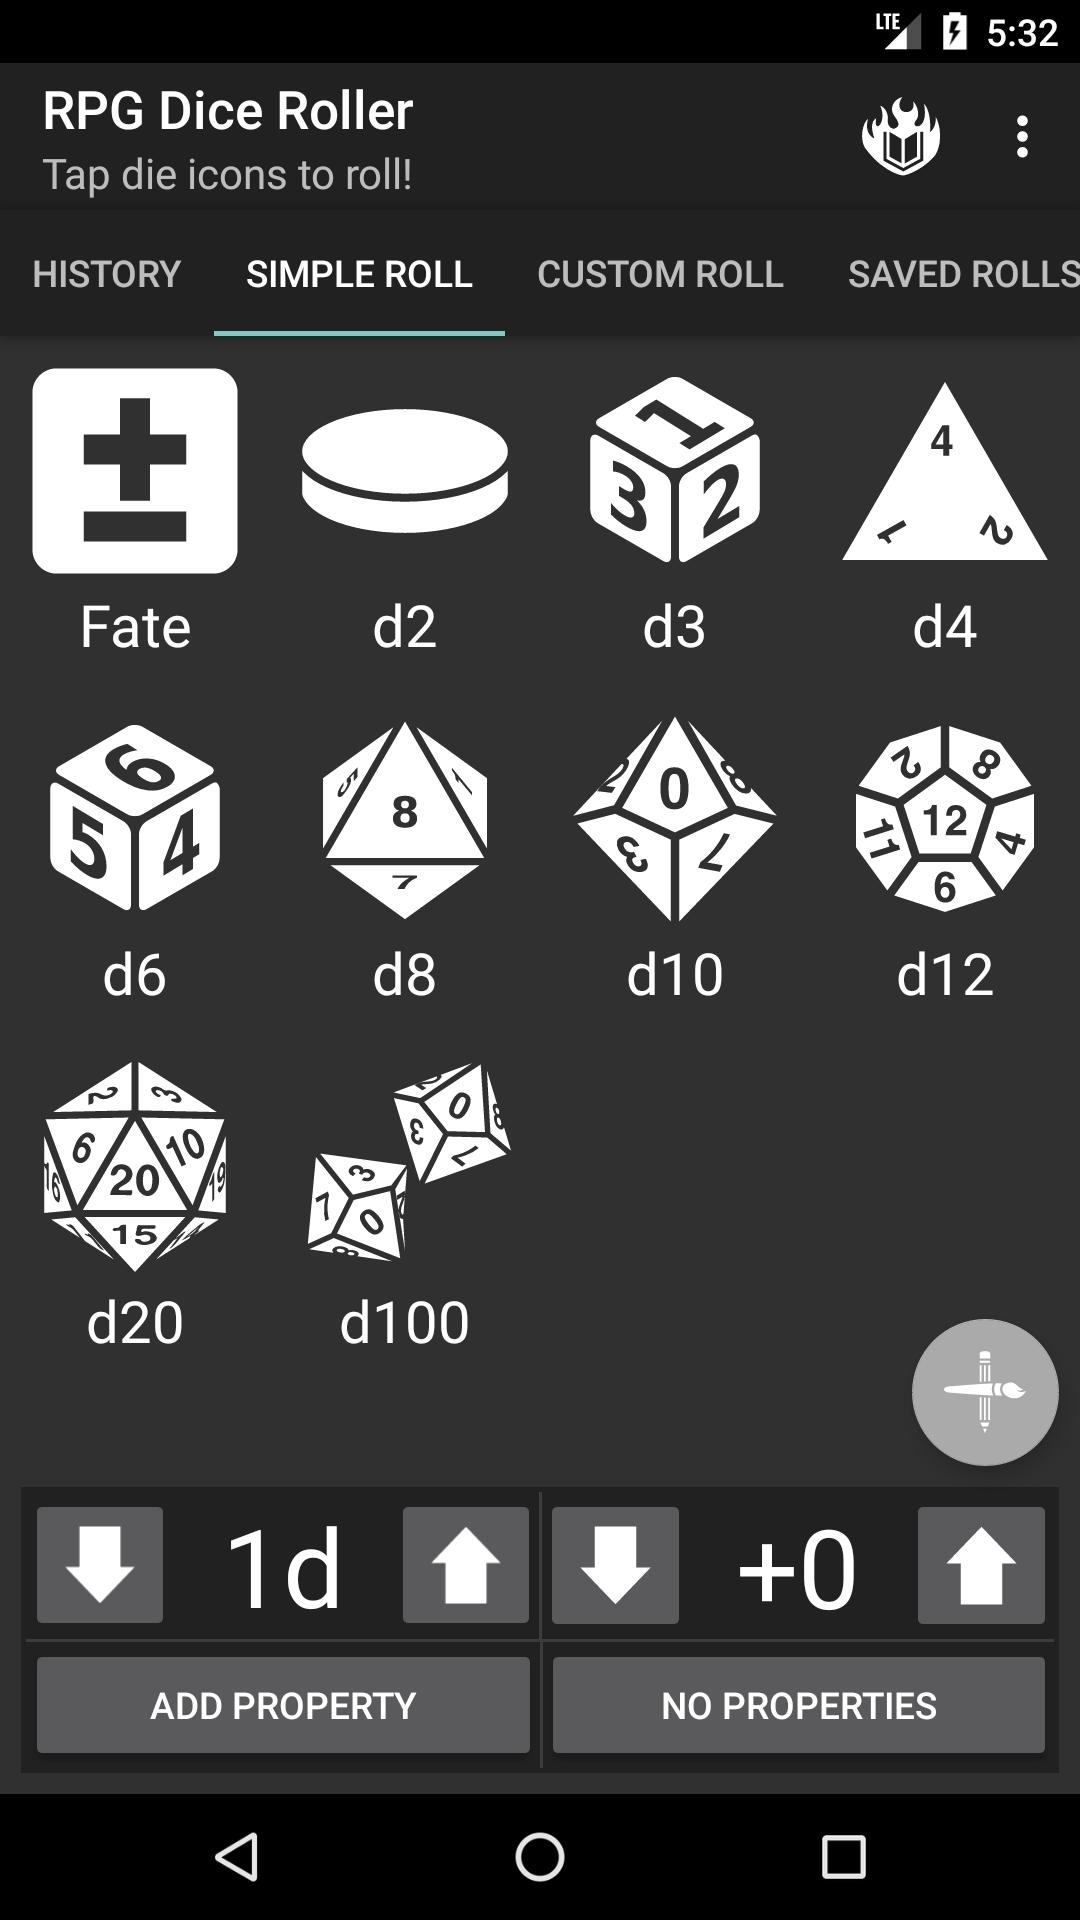 RPG Dice Roller for Android - APK Download